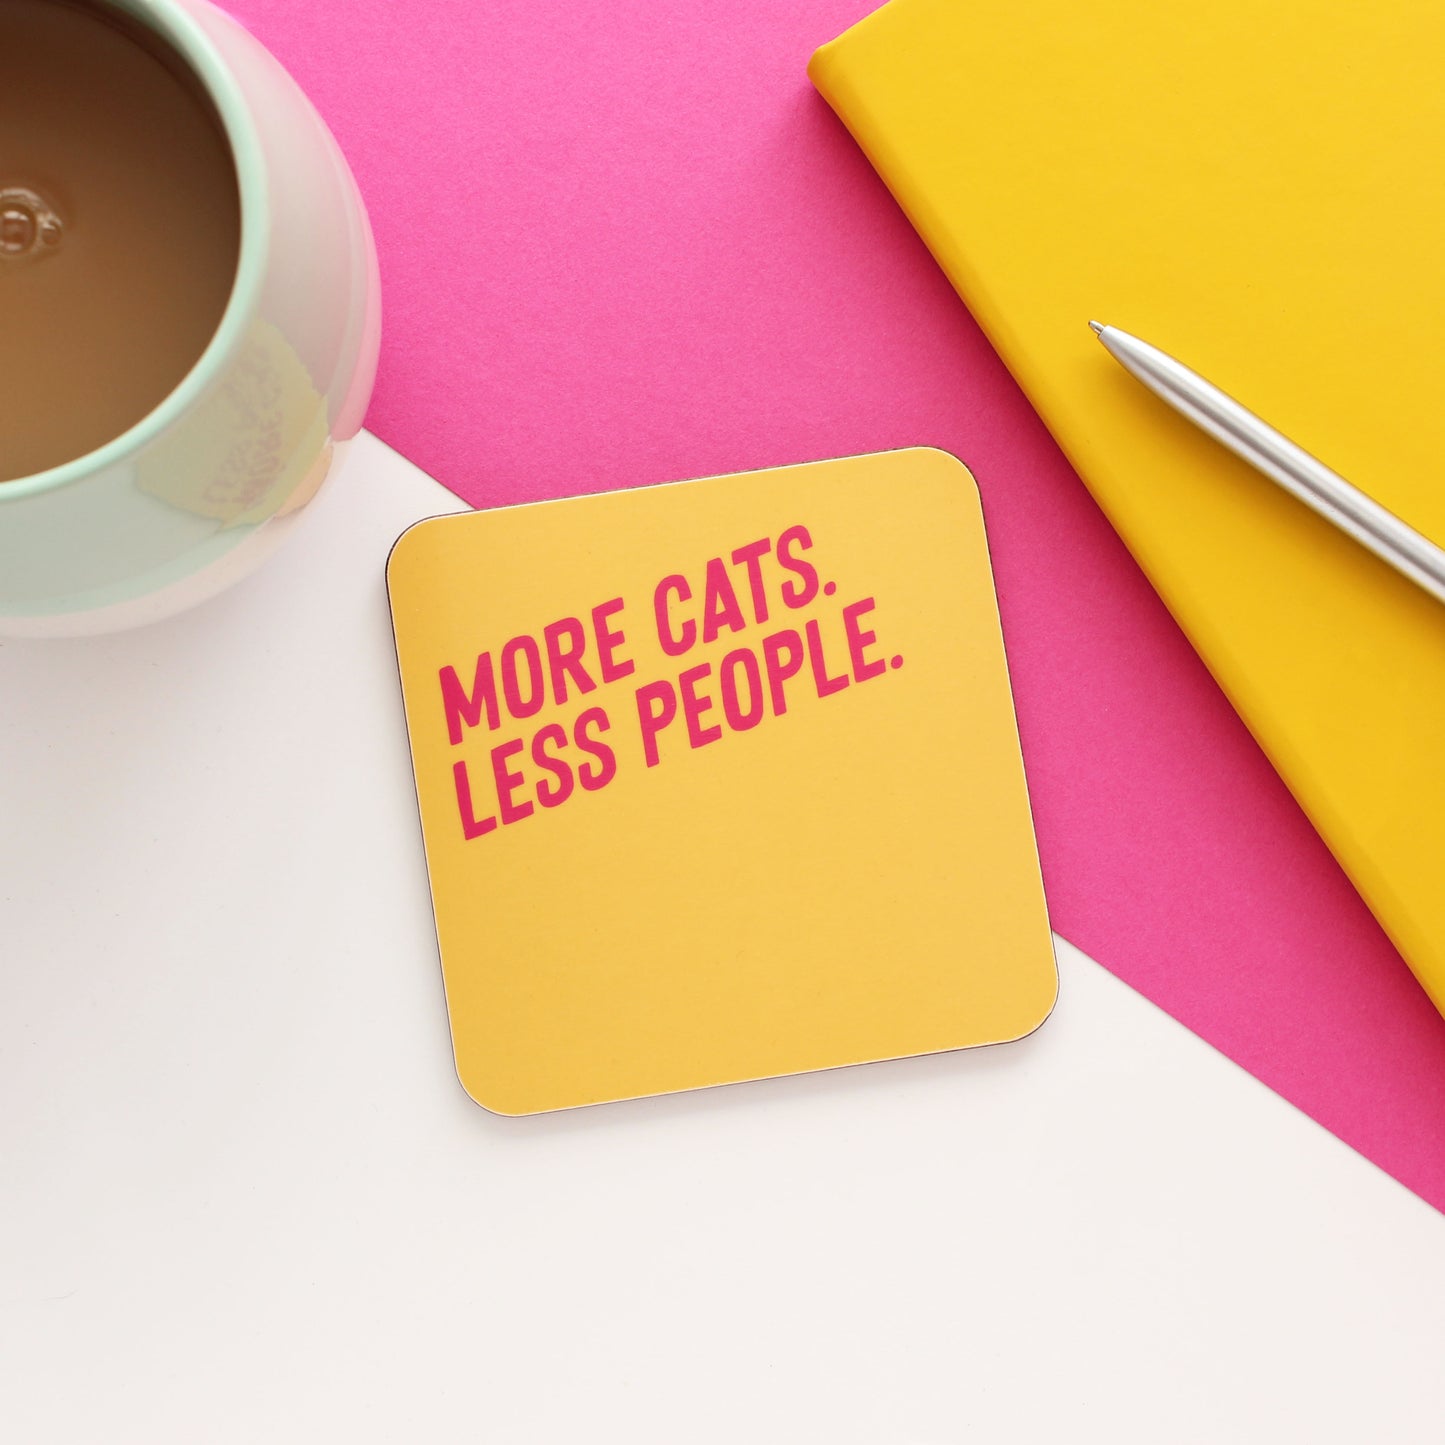 More cats less people coaster from Purple Tree Designs